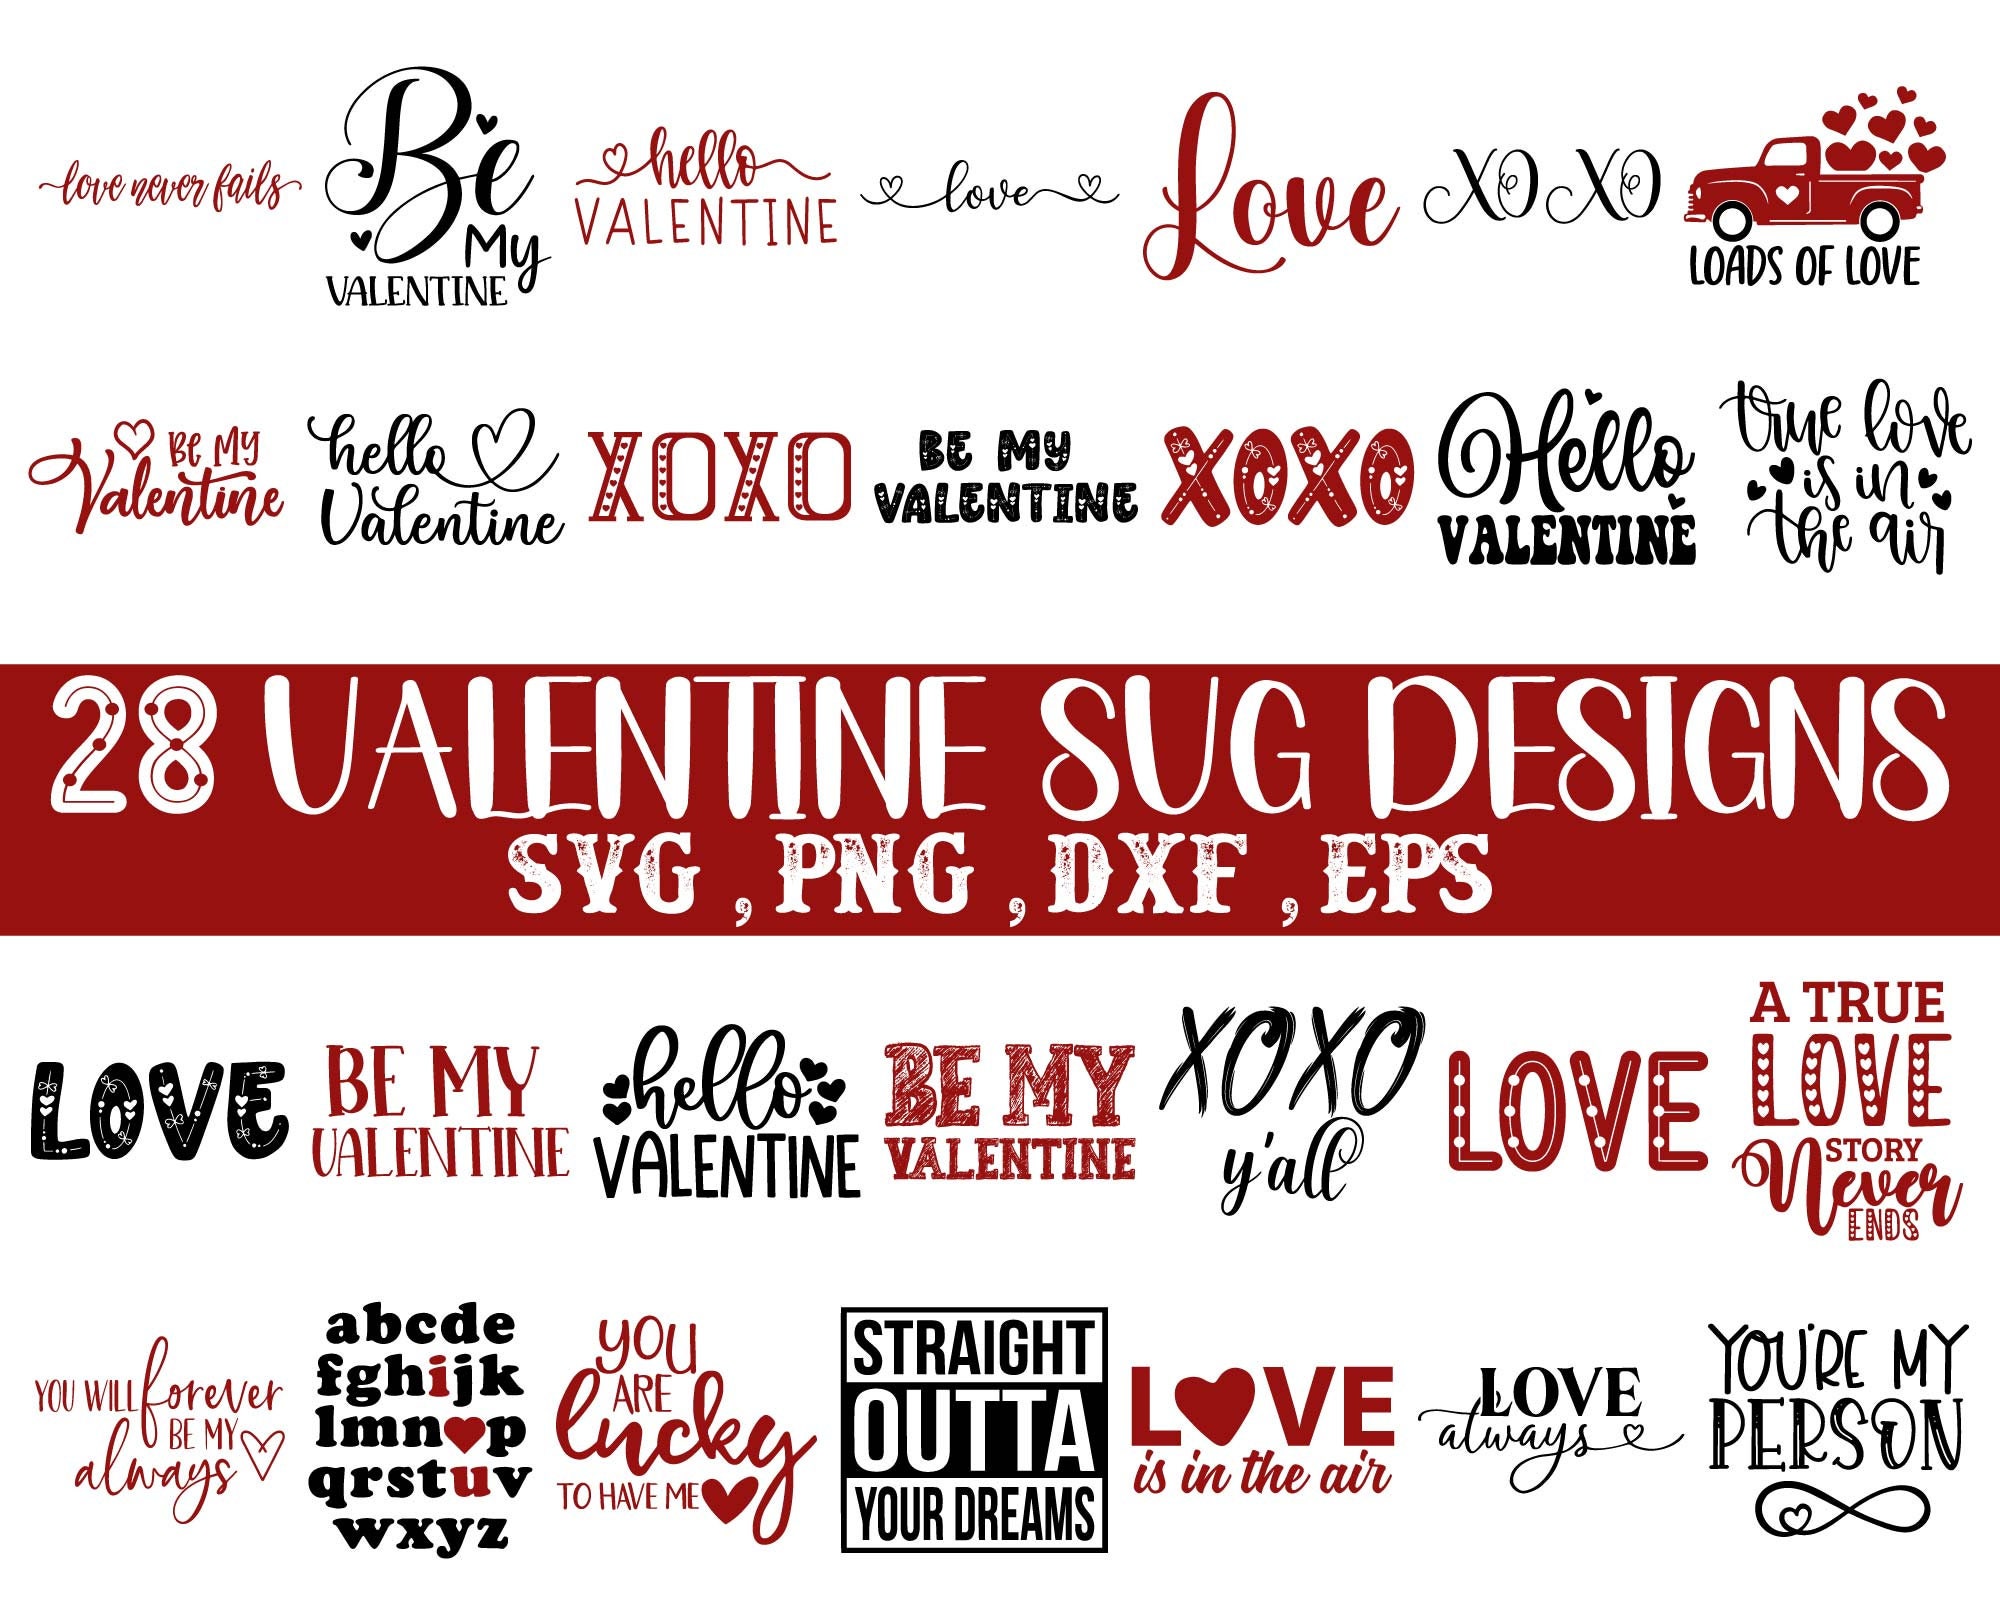 Red Heart Svg, Red Hand Drawn Heart Svg, Valentine's Day Svg, Love Svg. Cut  File Cricut, Png Pdf Eps, Vector, Stencil, Decal, Sticker.